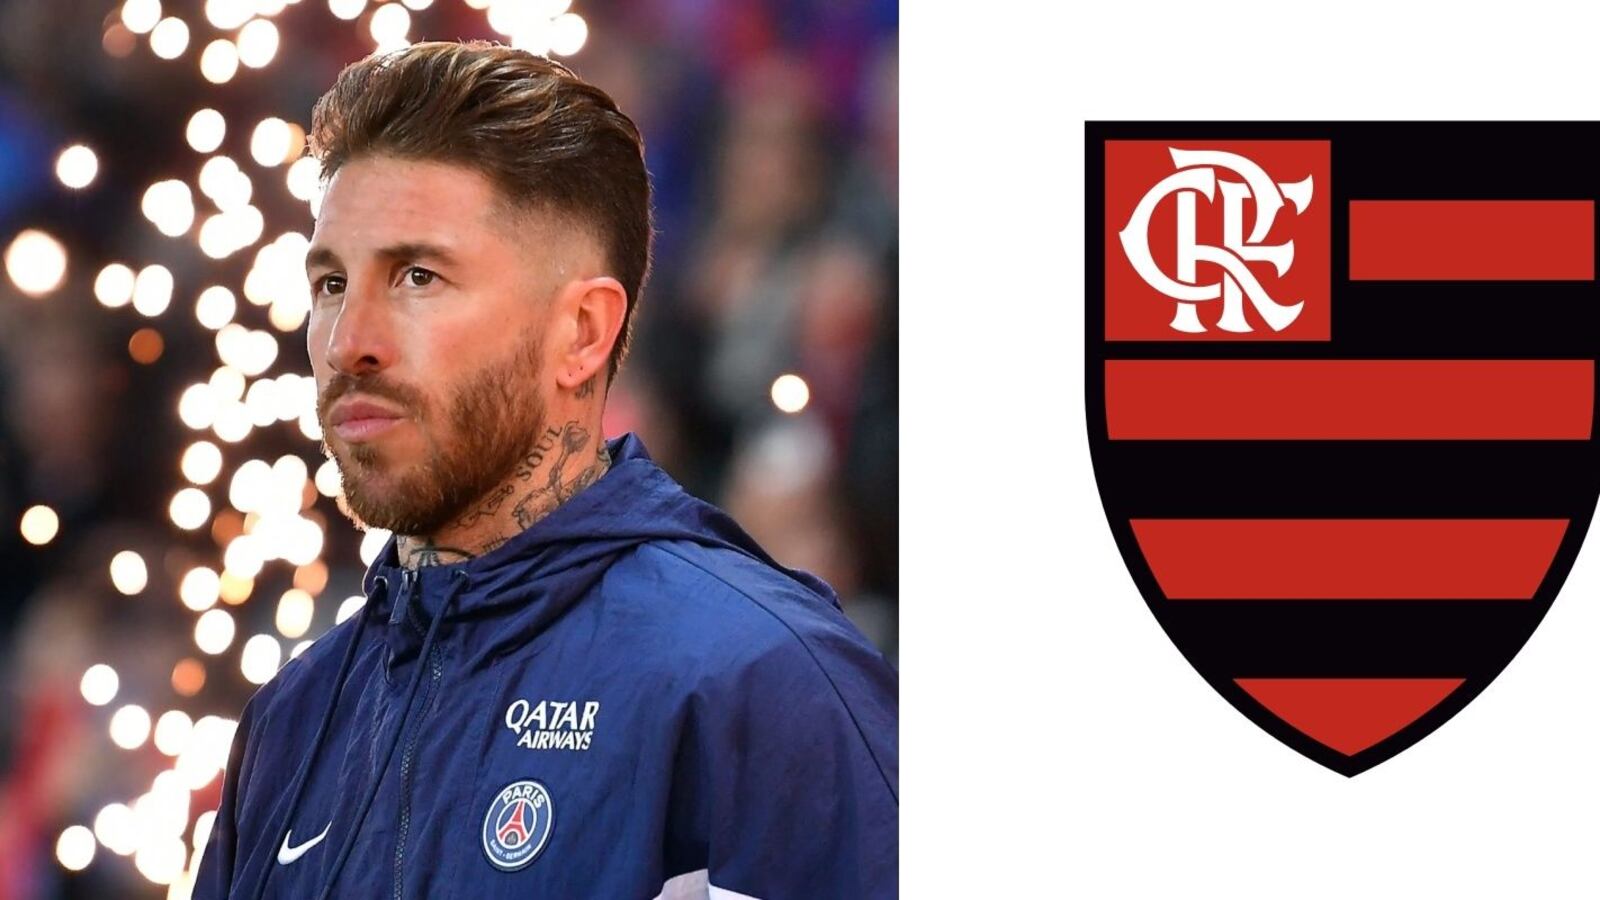 Goodbye MLS, The decision of Sergio Ramos to play for Flamengo that paralyzes Europe